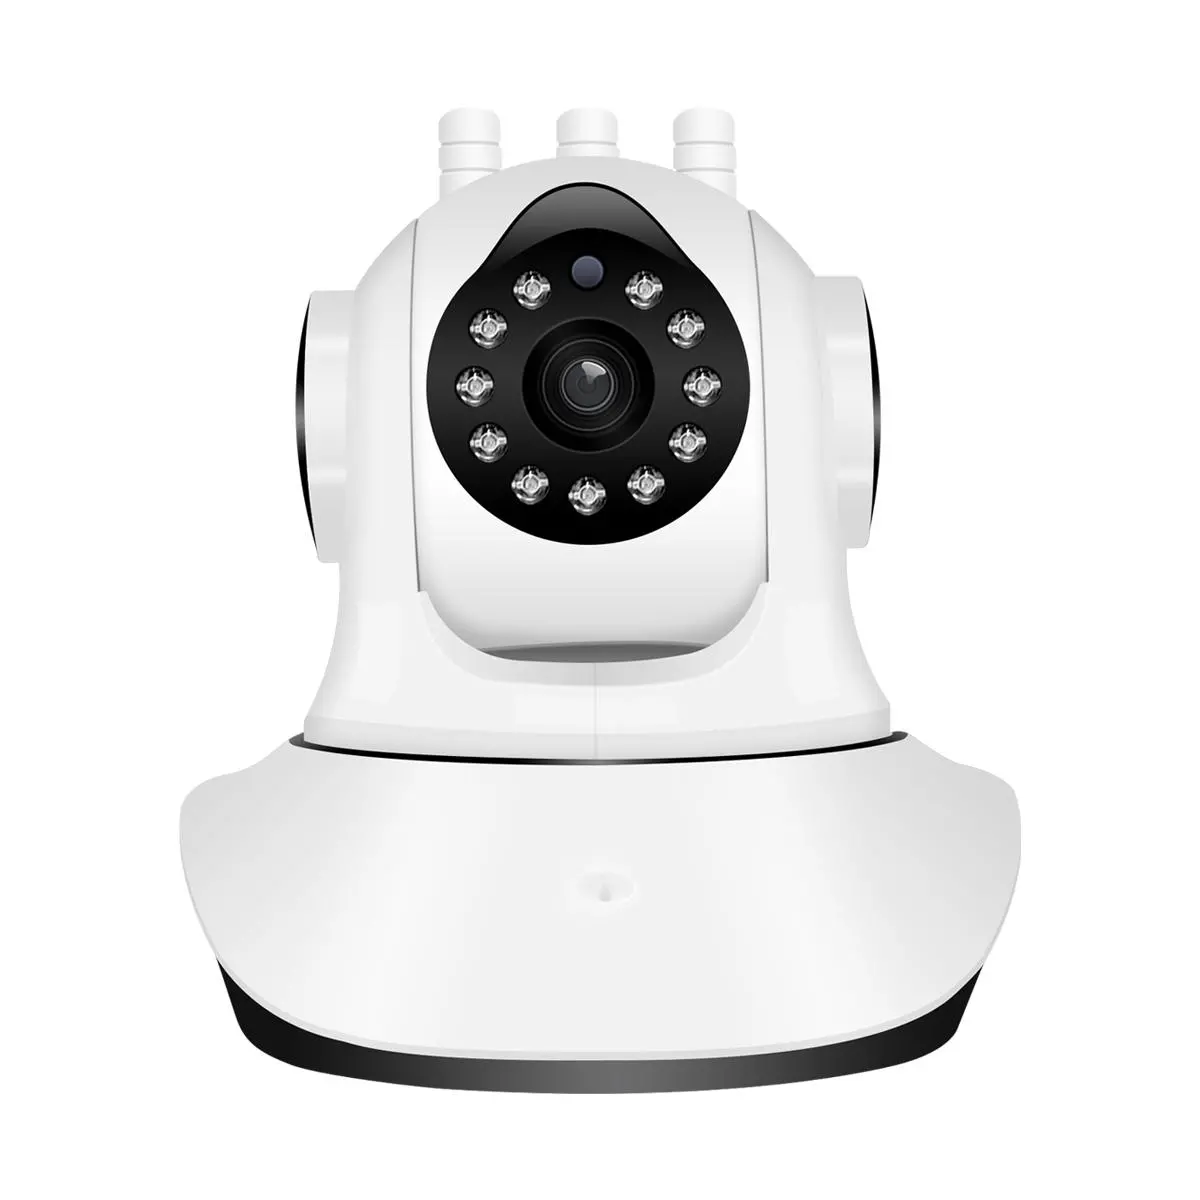 Jooan c6c hd 1080p wifi ip camera 11 led pt 360° built-in antenna ip camera moving detection two-way audio baby monitors